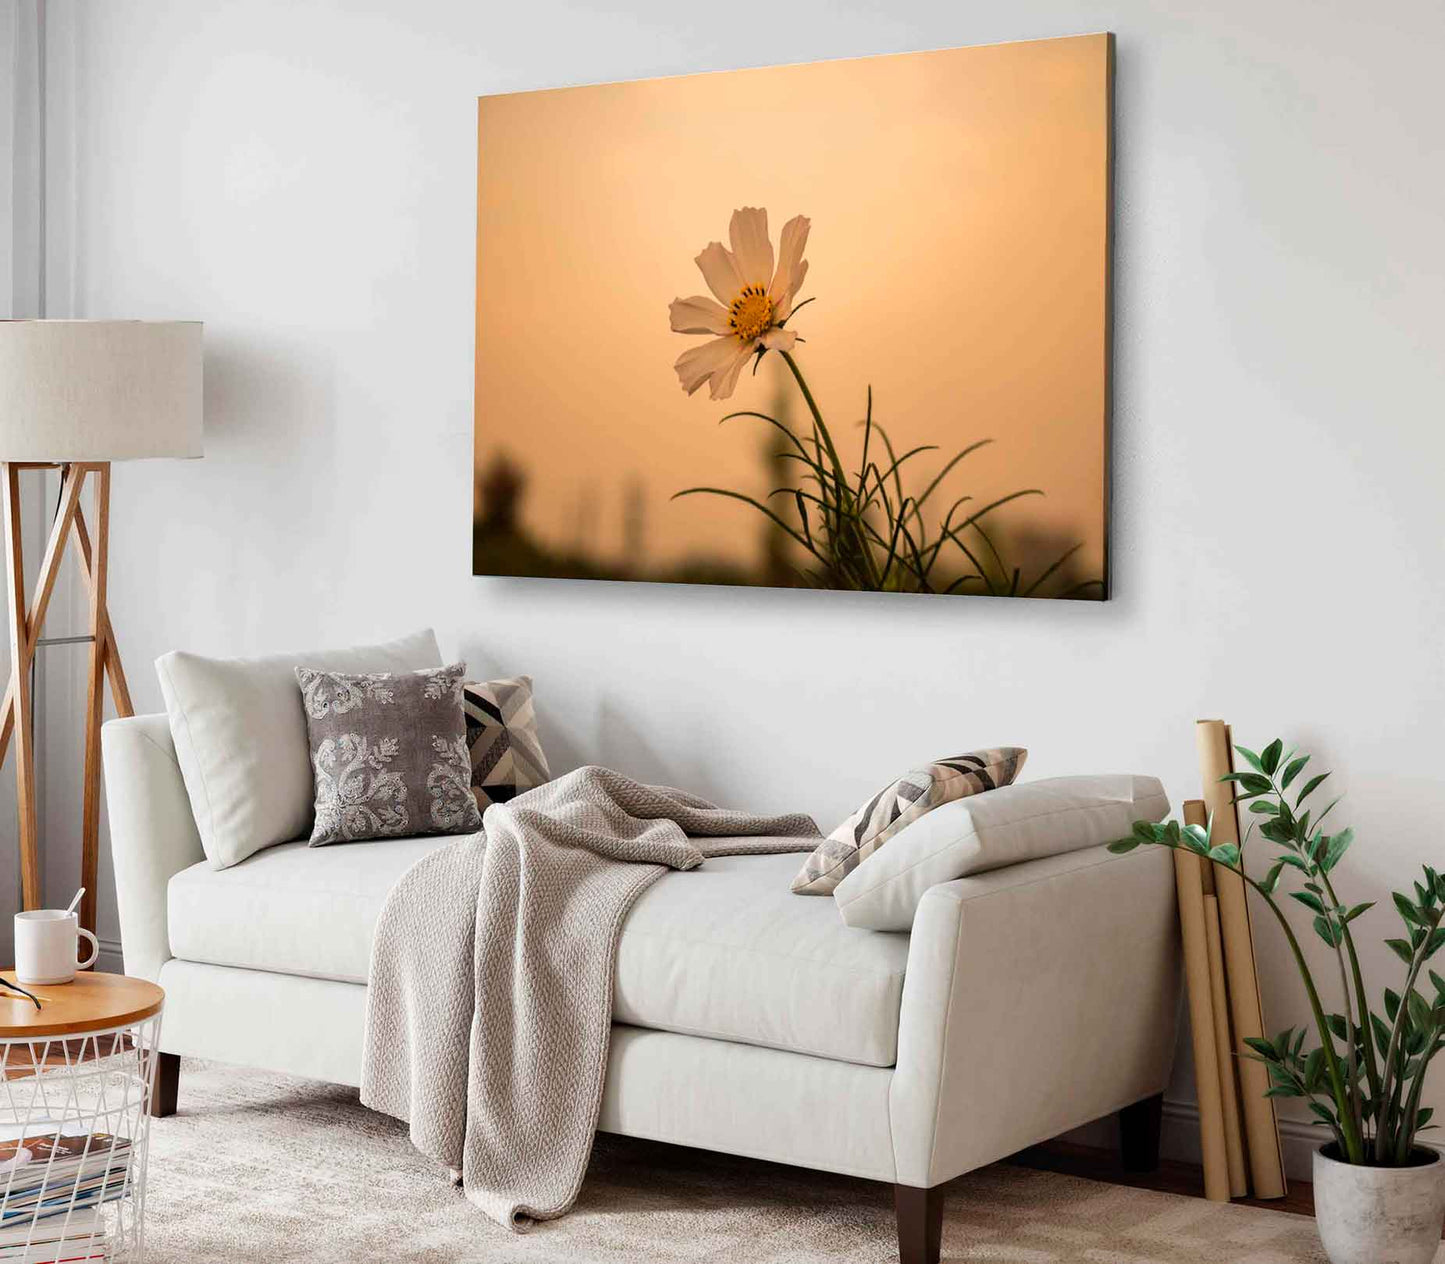 Bella Home Closeup View of Daisy Flower Print Canvas Ready to hang